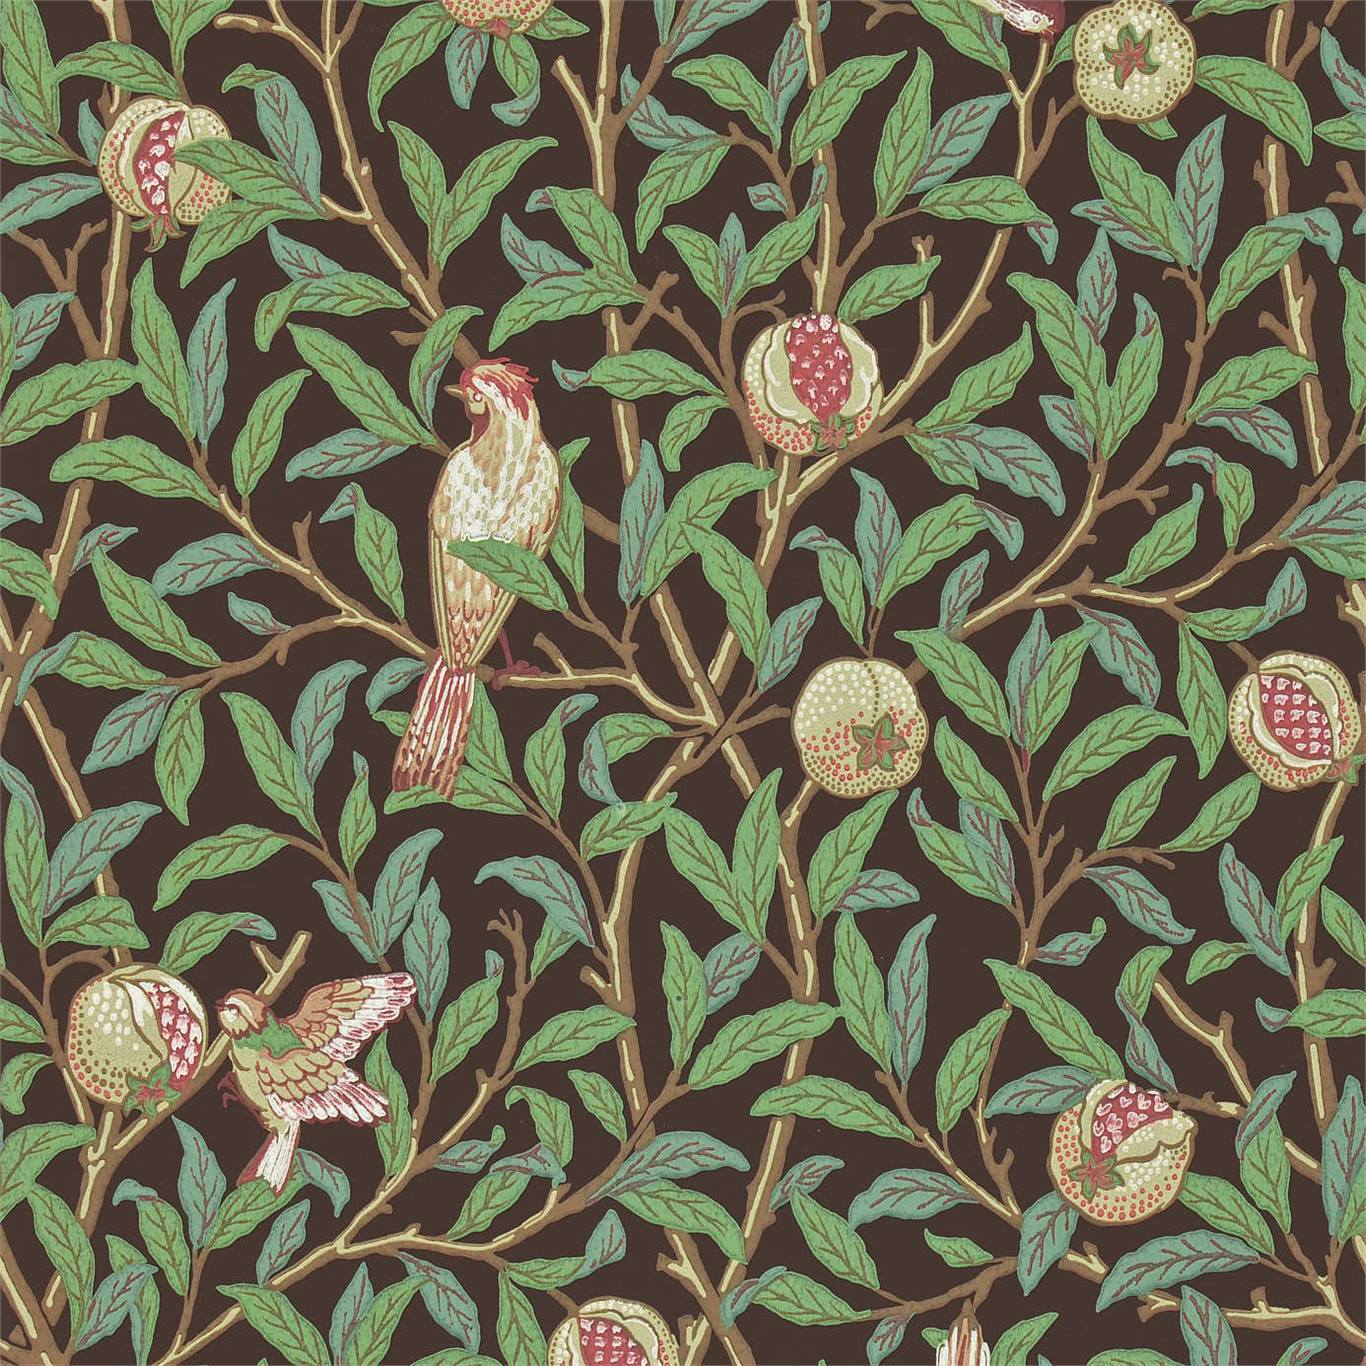 William Morris Bird And Pomegranate Wallpaper DCMW216867 by Morris & Co